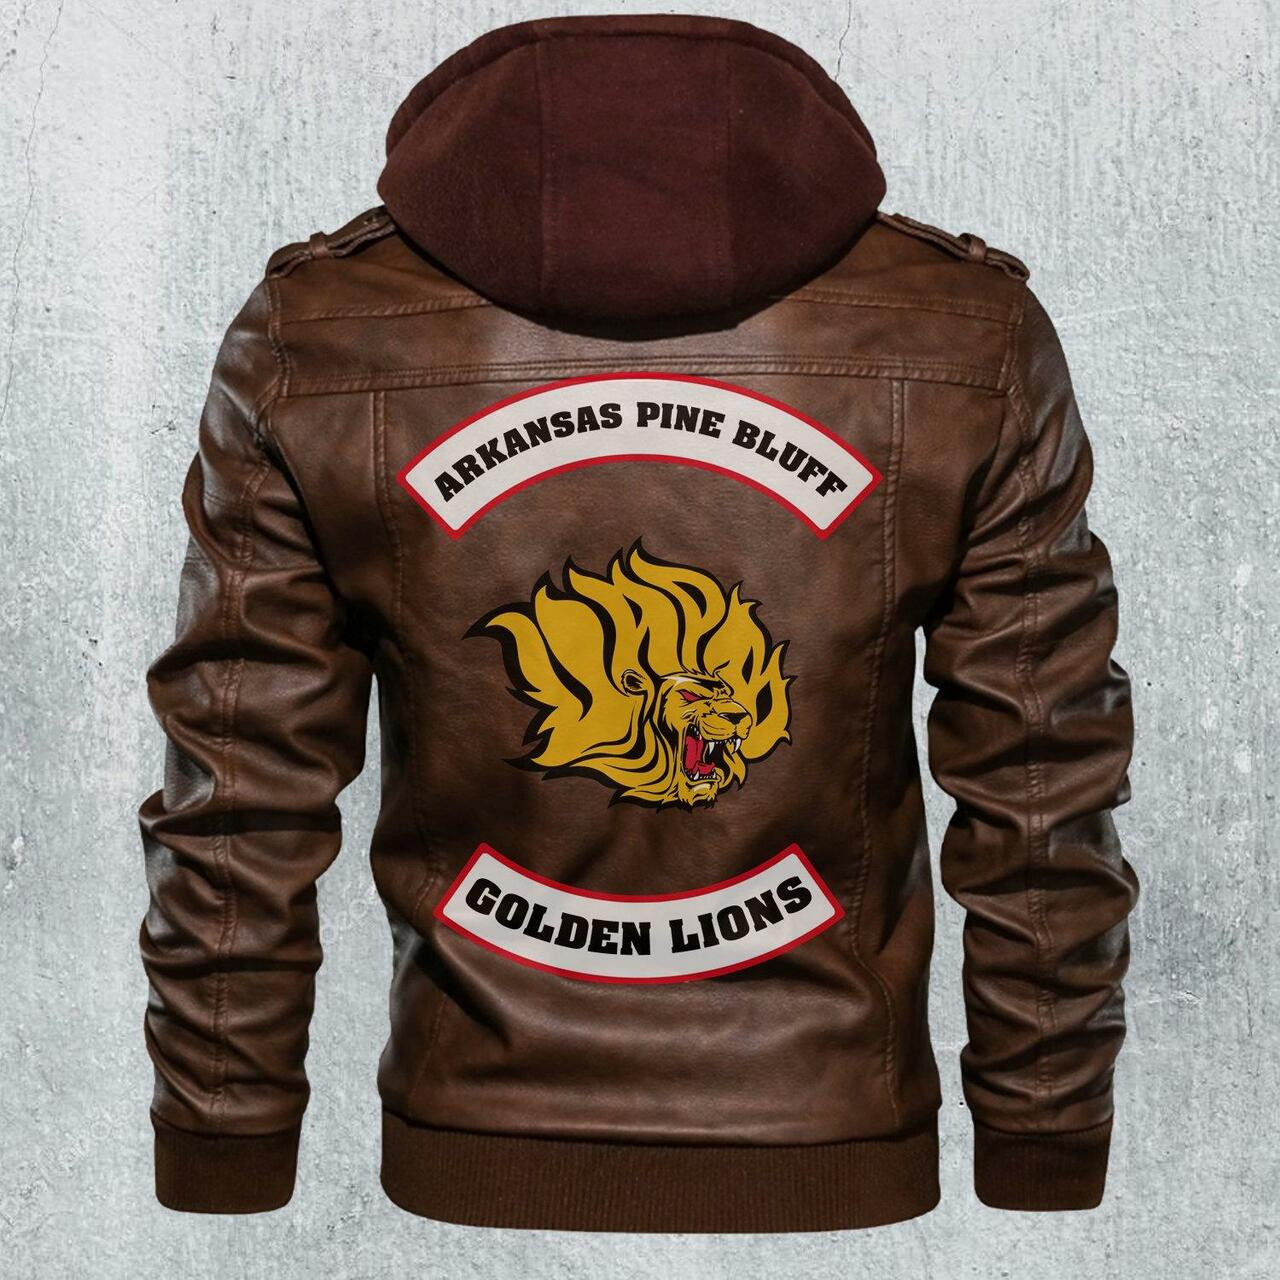 Check out our collection of the latest and greatest leather jacket 214